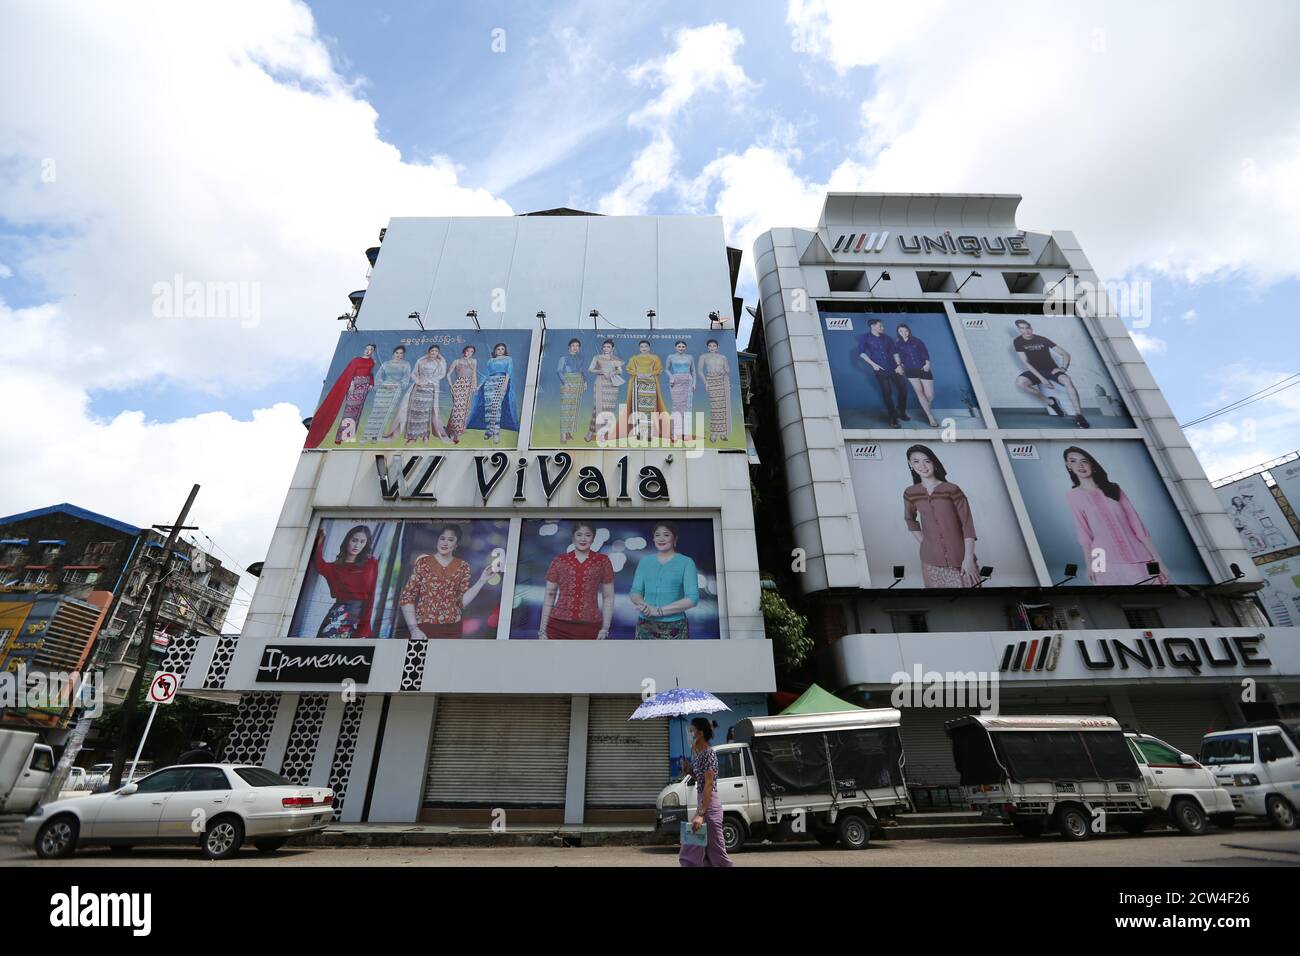 Yangon. 26th Sep, 2020. Photo taken on Sept. 26, 2020 shows closed shops due to COVID-19 pandemic in Yangon, Myanmar. The total number of COVID-19 cases in Myanmar has increased to 10,734 as of Sunday, according to a release from the Ministry of Health and Sports. A total of 743 more COVID-19 confirmed cases were reported on Sunday. The death toll of COVID-19 reached 226 with 28 newly reported deaths on Sunday in the country, the release said. Credit: U Aung/Xinhua/Alamy Live News Stock Photo